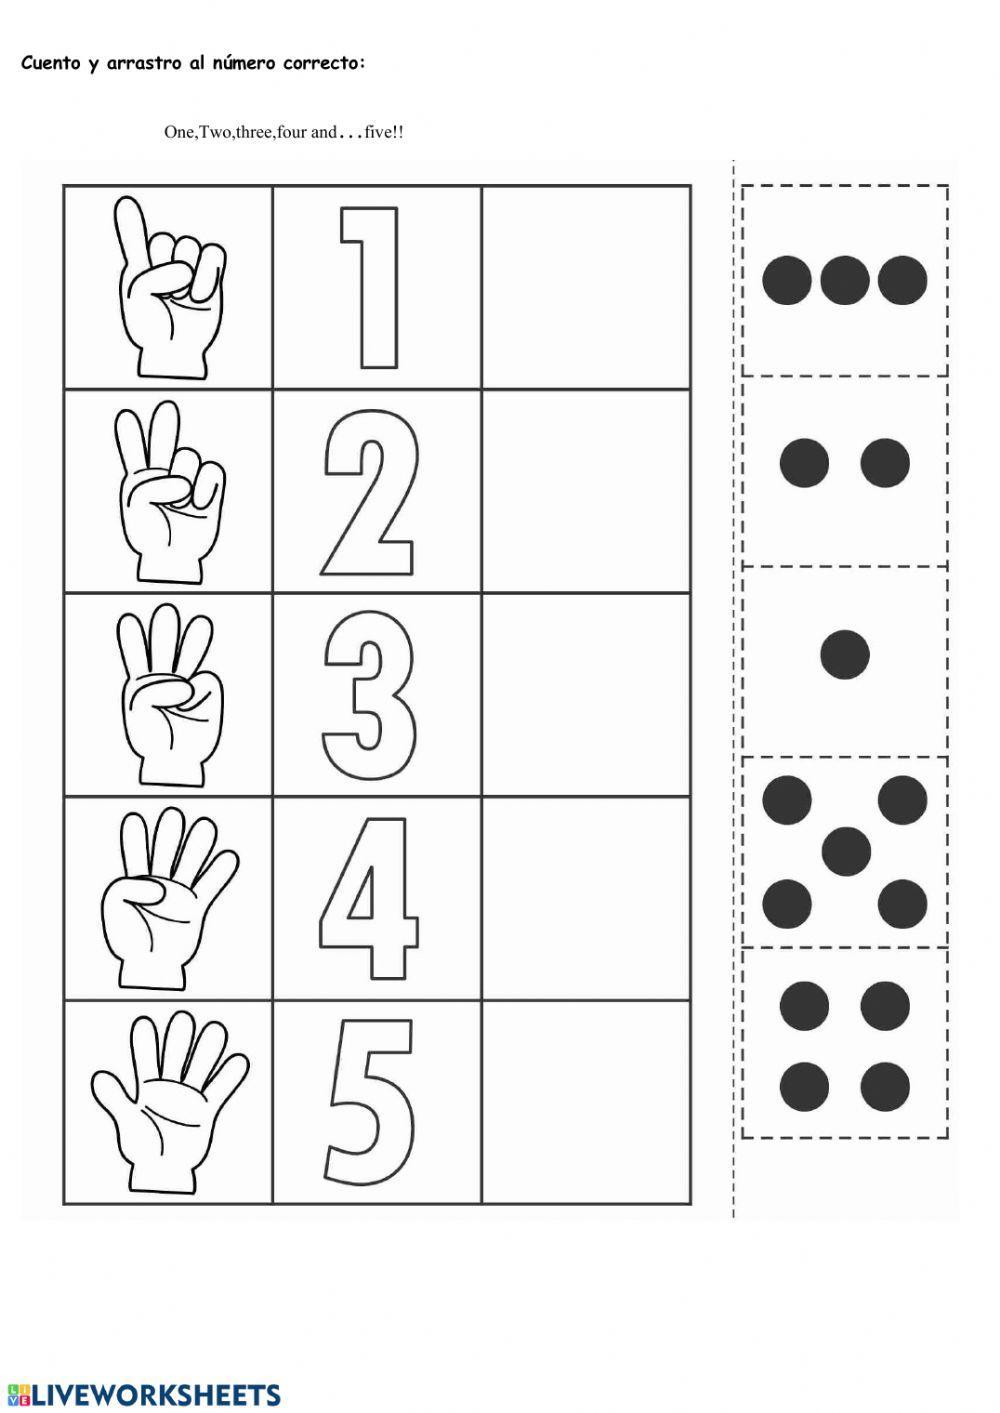 1-5 numbers